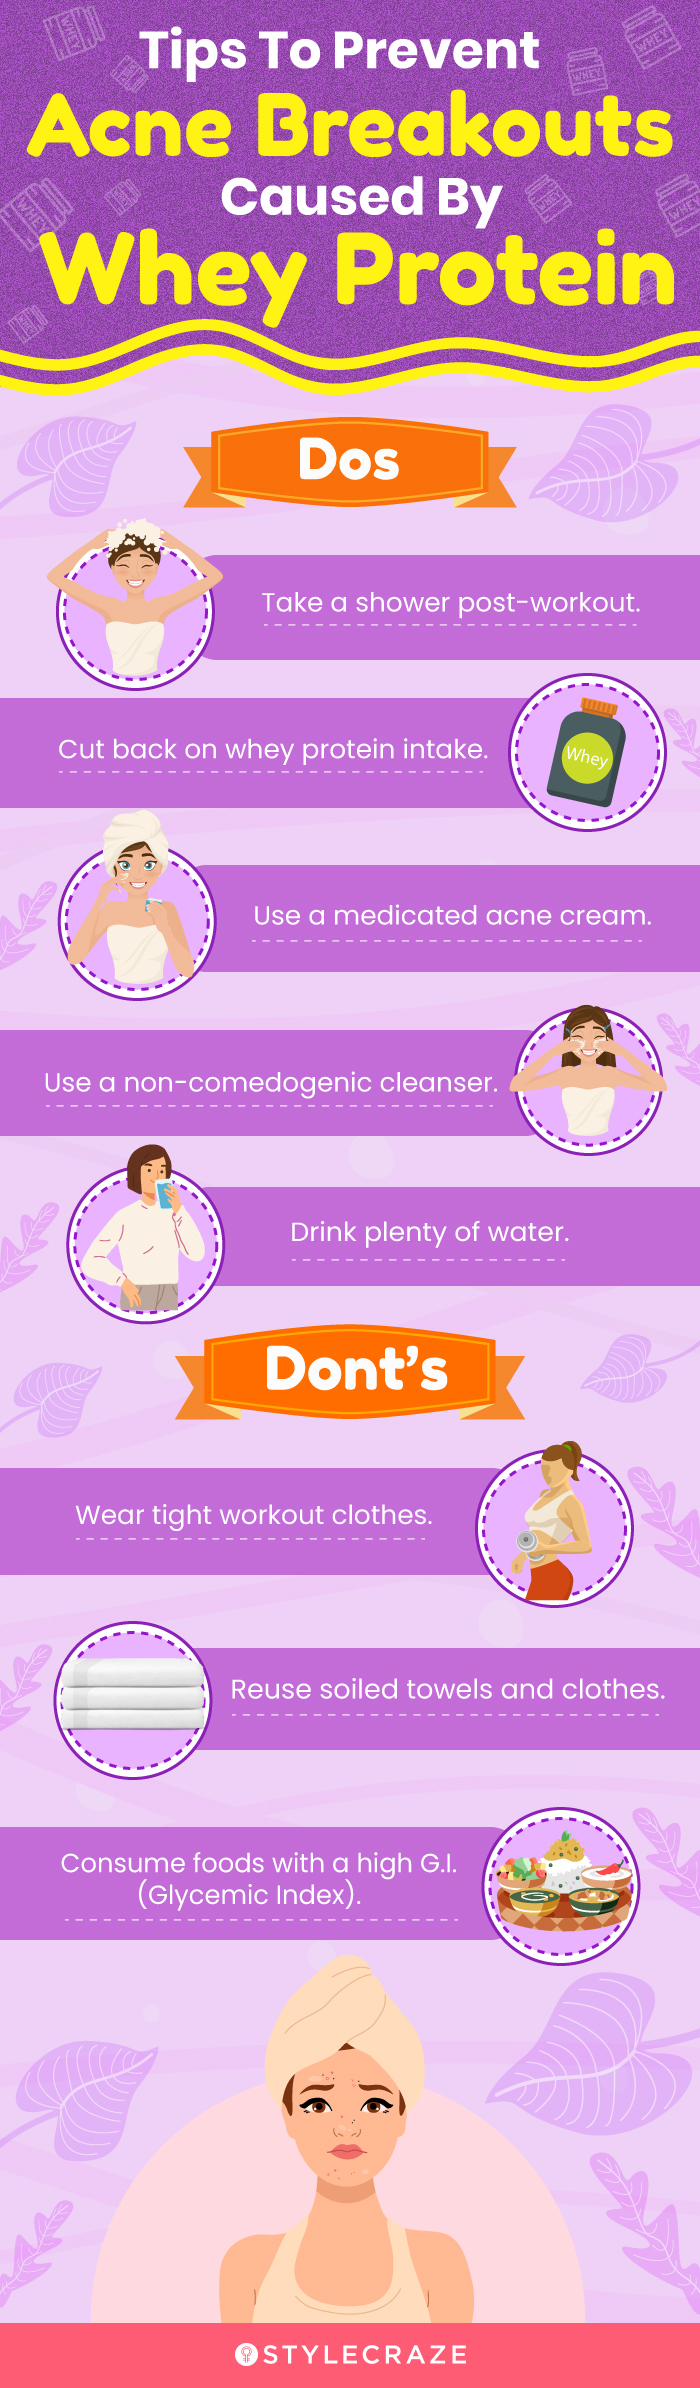 tips to prevent acne breakouts caused by whey protein (infographic)